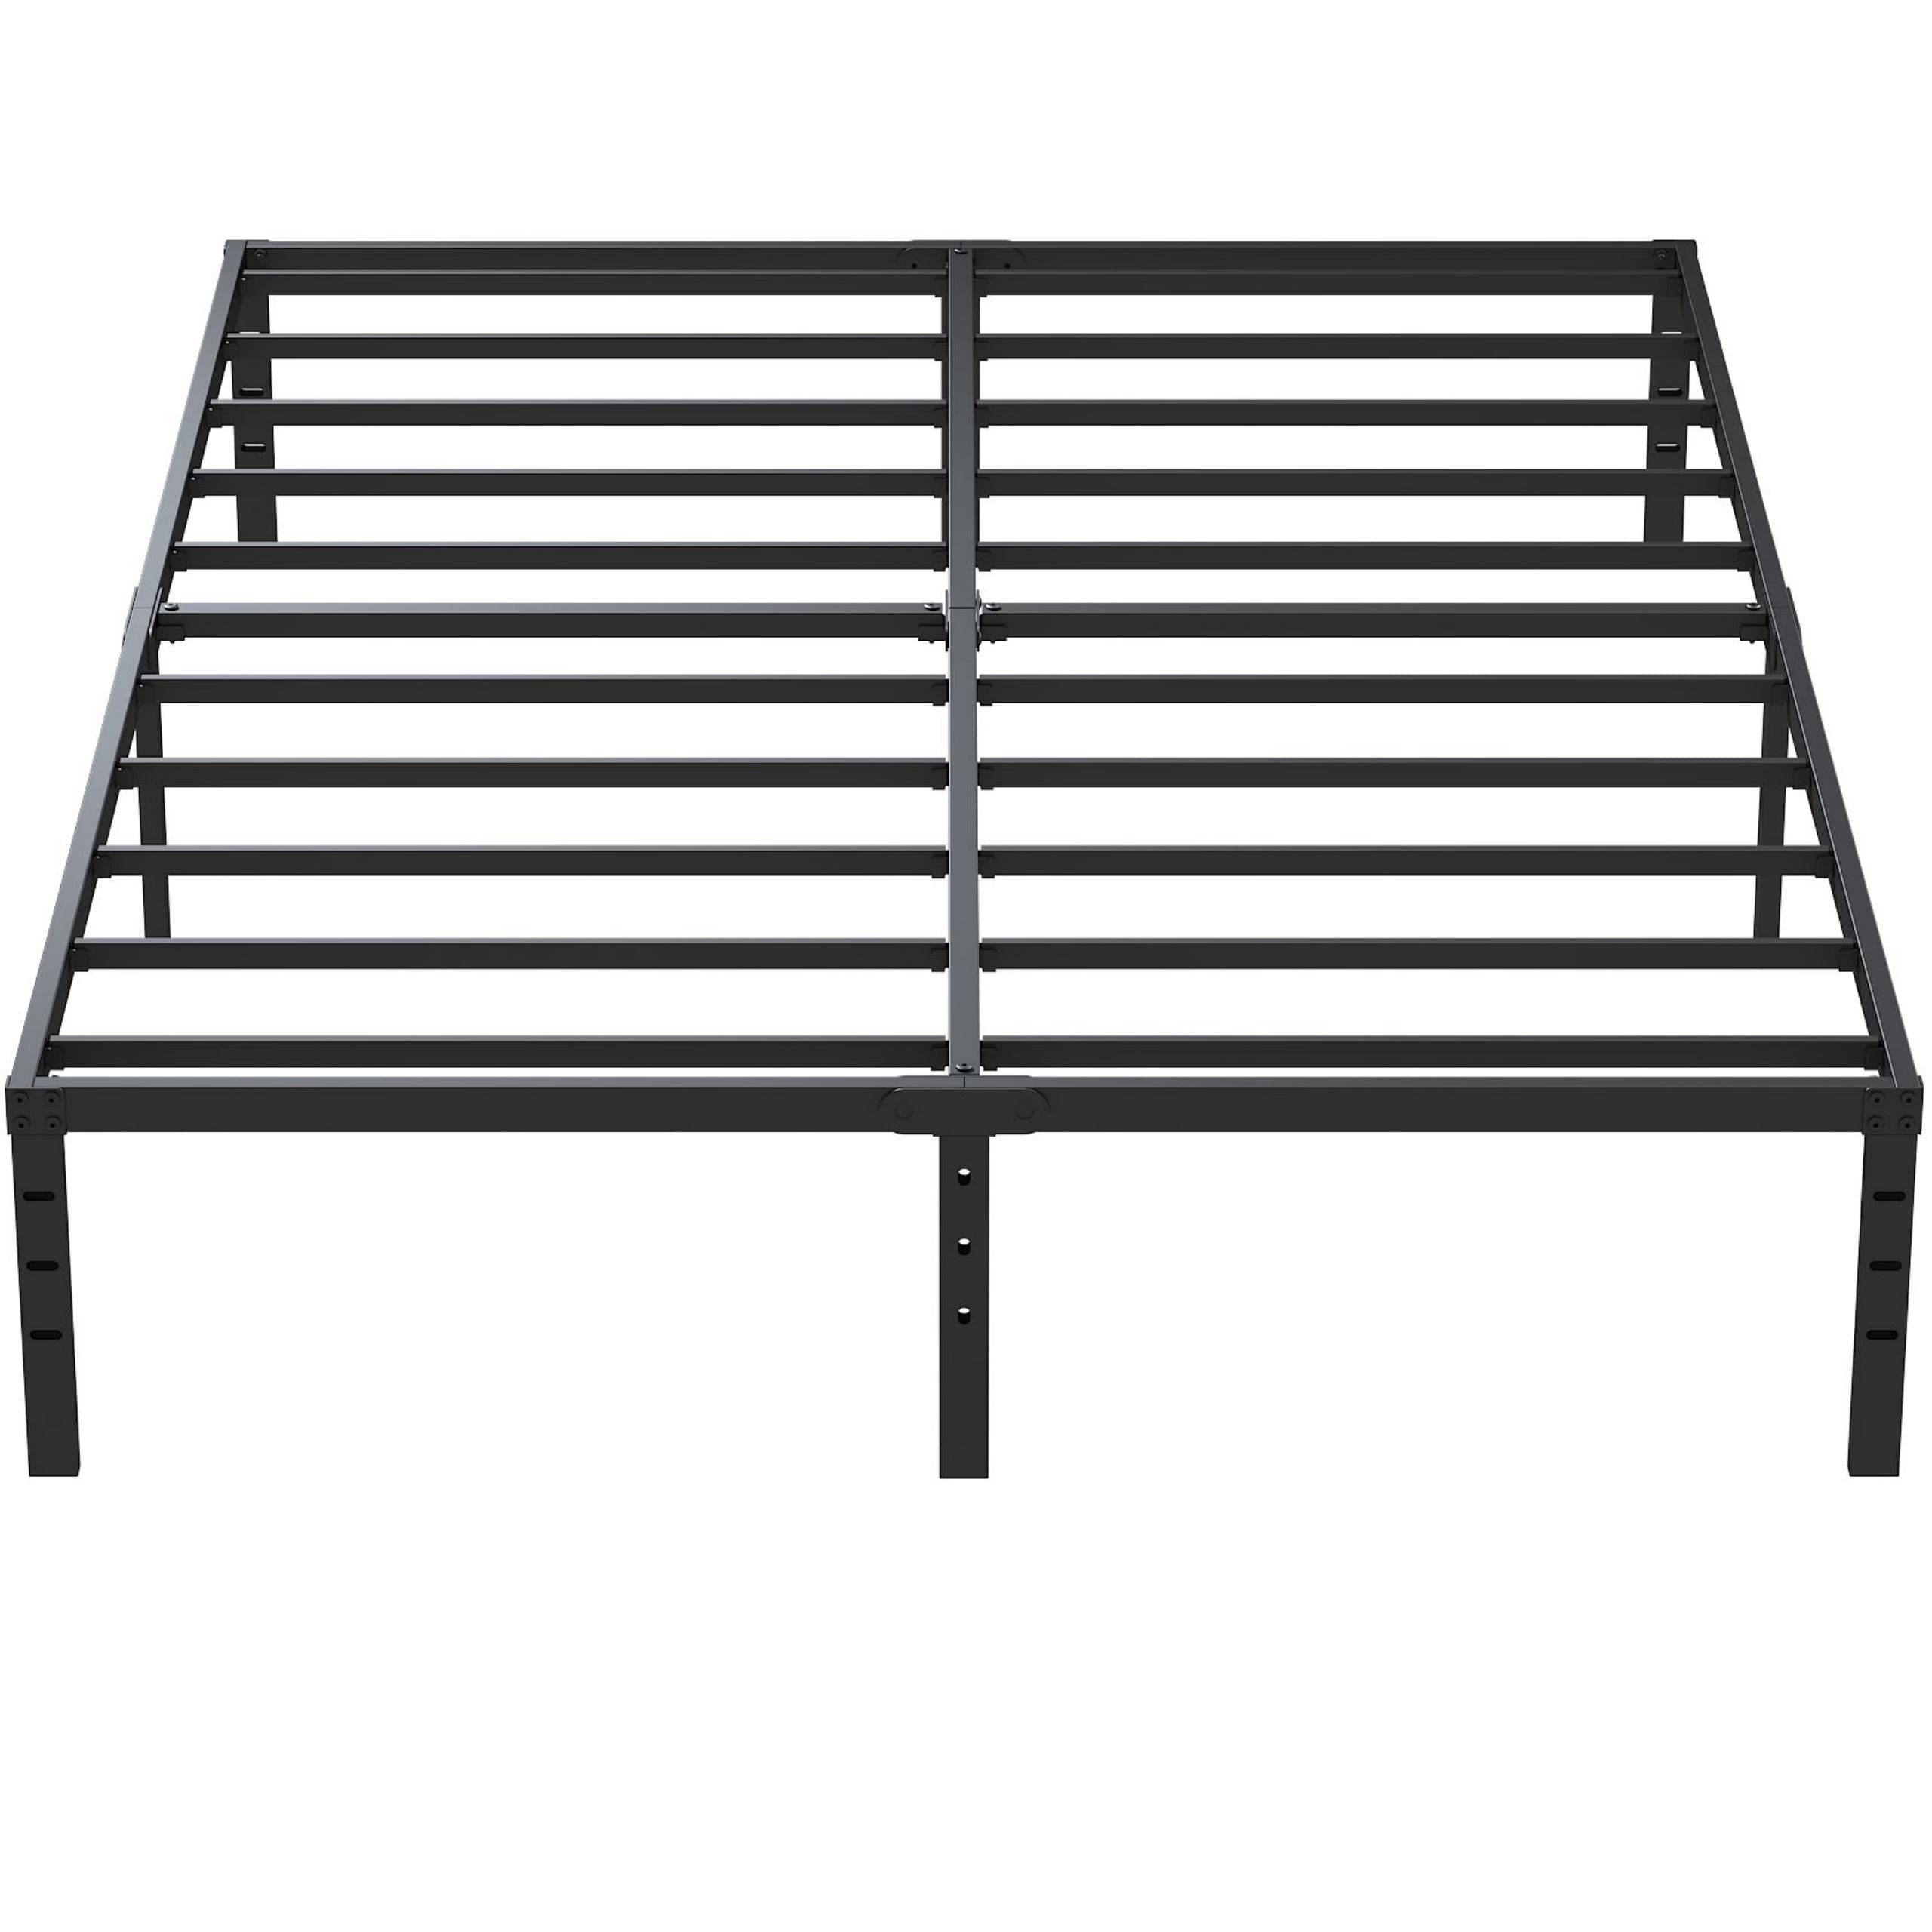 Maenizi California King Bed Frames No Box Spring Needed, 14 Inch Heavy Duty Metal Platform Support Up to 3000 lbs with Steel Slat, Easy Assembly, Noise Free, Black